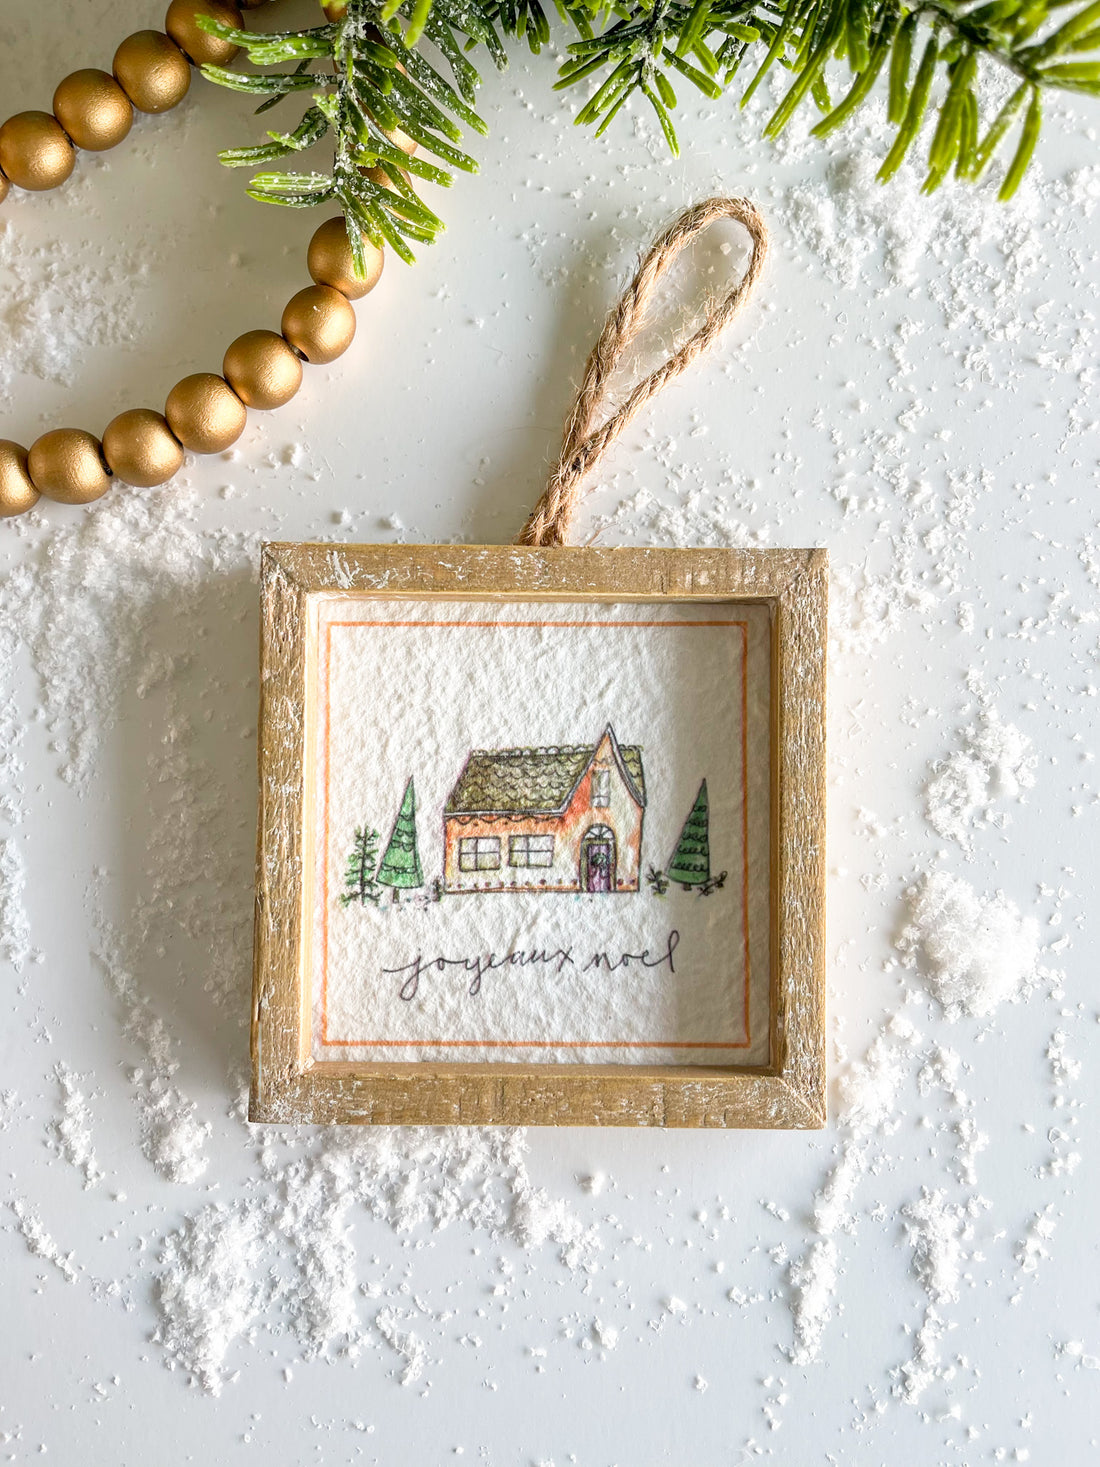 Whitewashed Joyeaux Noel Picture Ornament